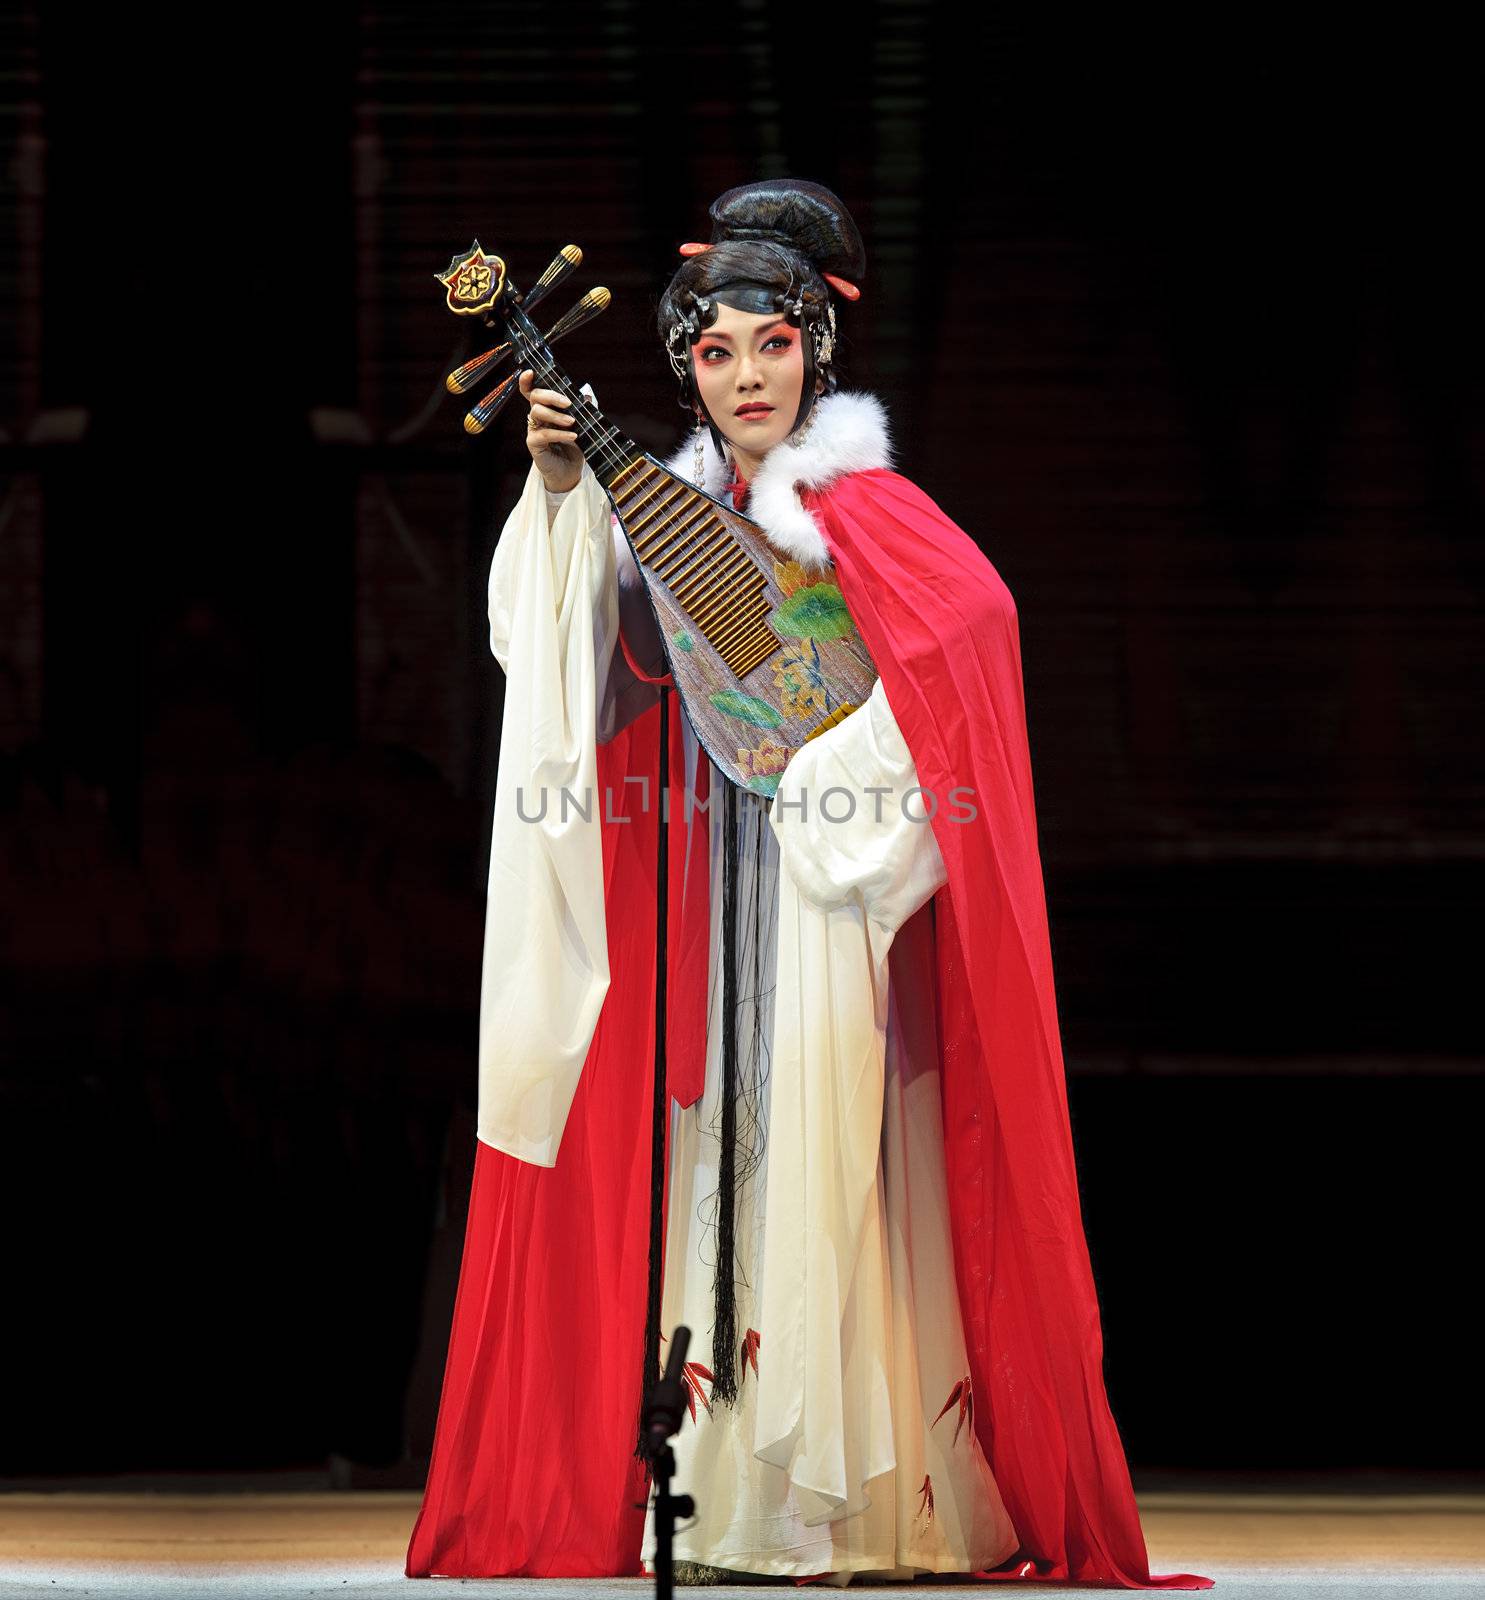 CHENGDU - JUN 4: chinese Sichuan opera performer make a show on stage to compete for awards in 25th Chinese Drama Plum Blossom Award competition at Xinan theater.Jun 4, 2011 in Chengdu, China.
Chinese Drama Plum Blossom Award is the highest theatrical award in China.